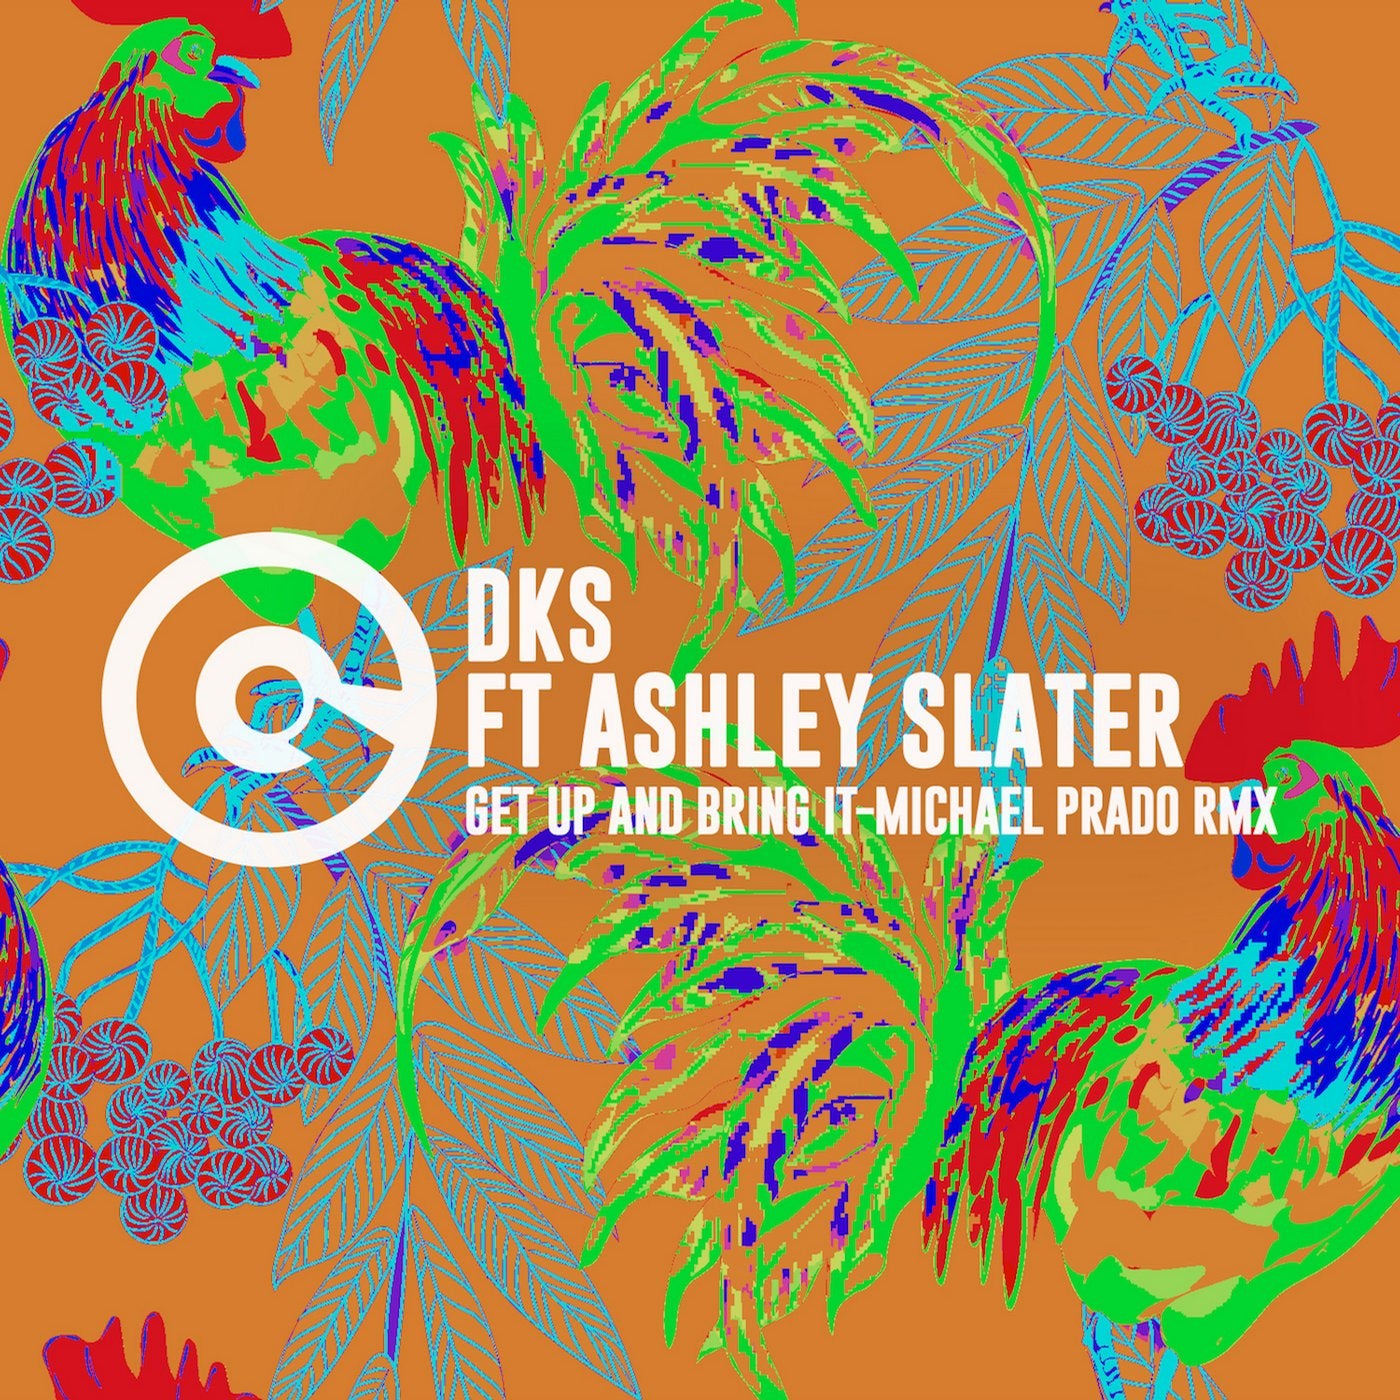 Get Up And Bring It (Michael Prado Remix) Feat. Ashley Slater